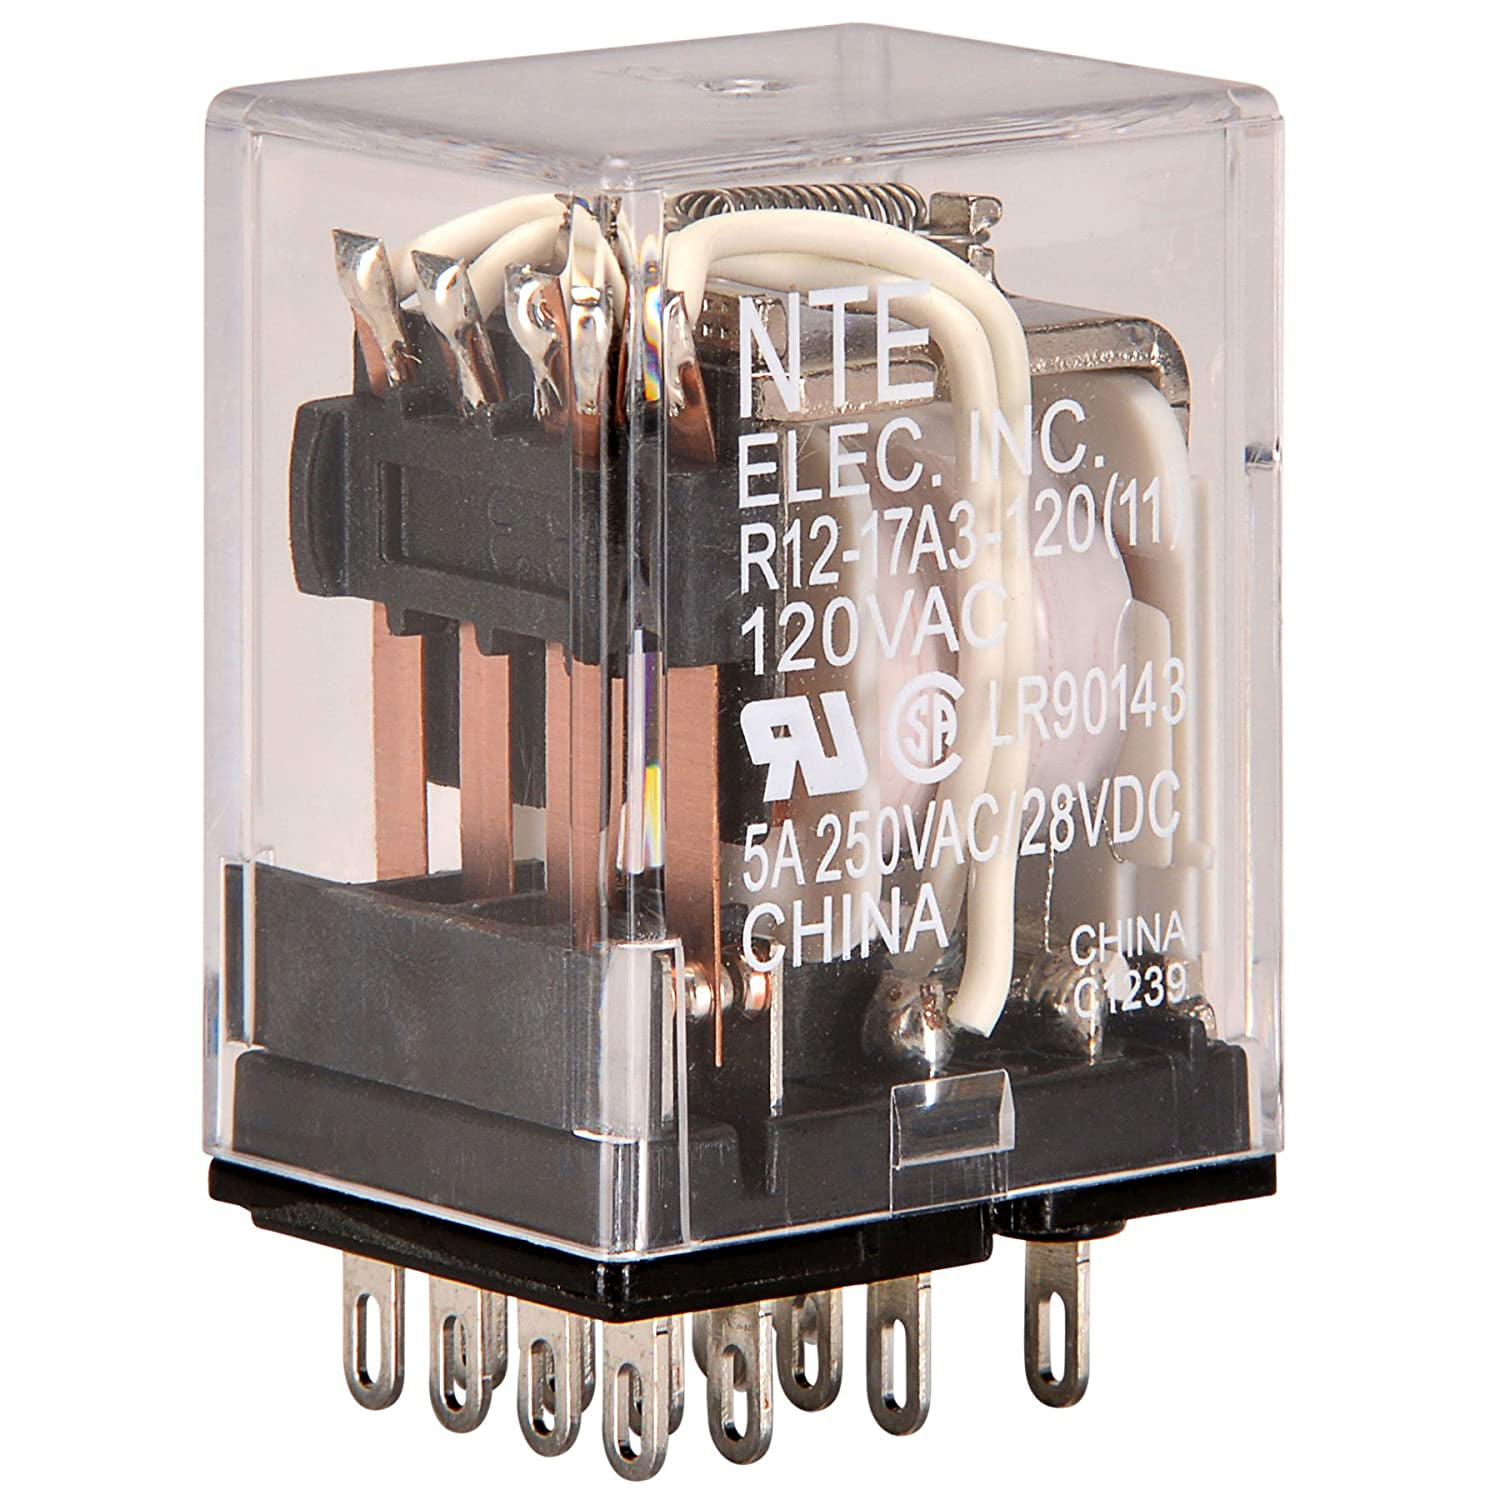 5 Amp 4PDT Contact Arrangement NTE Electronics R12-17A3-24 Series R12 General Purpose AC Relay 24 VAC 